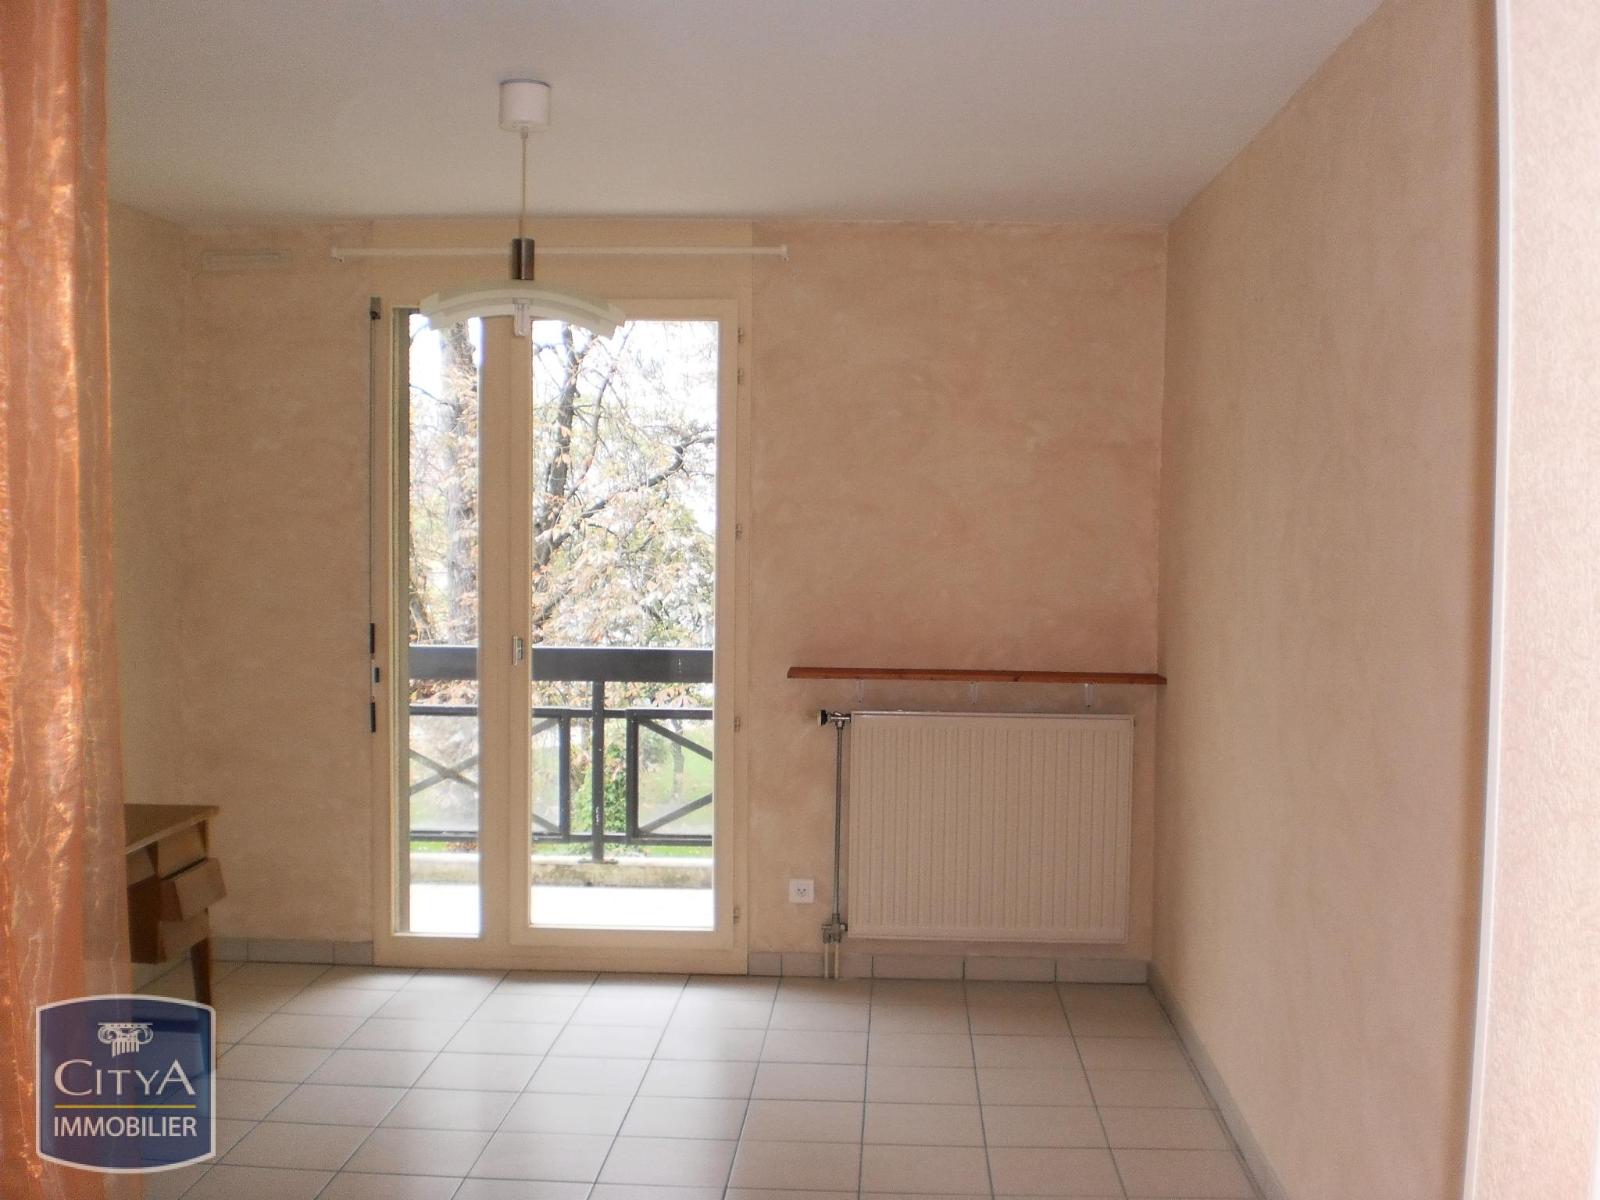 Appartement 1 pièce - 33m² - CHAMBERY